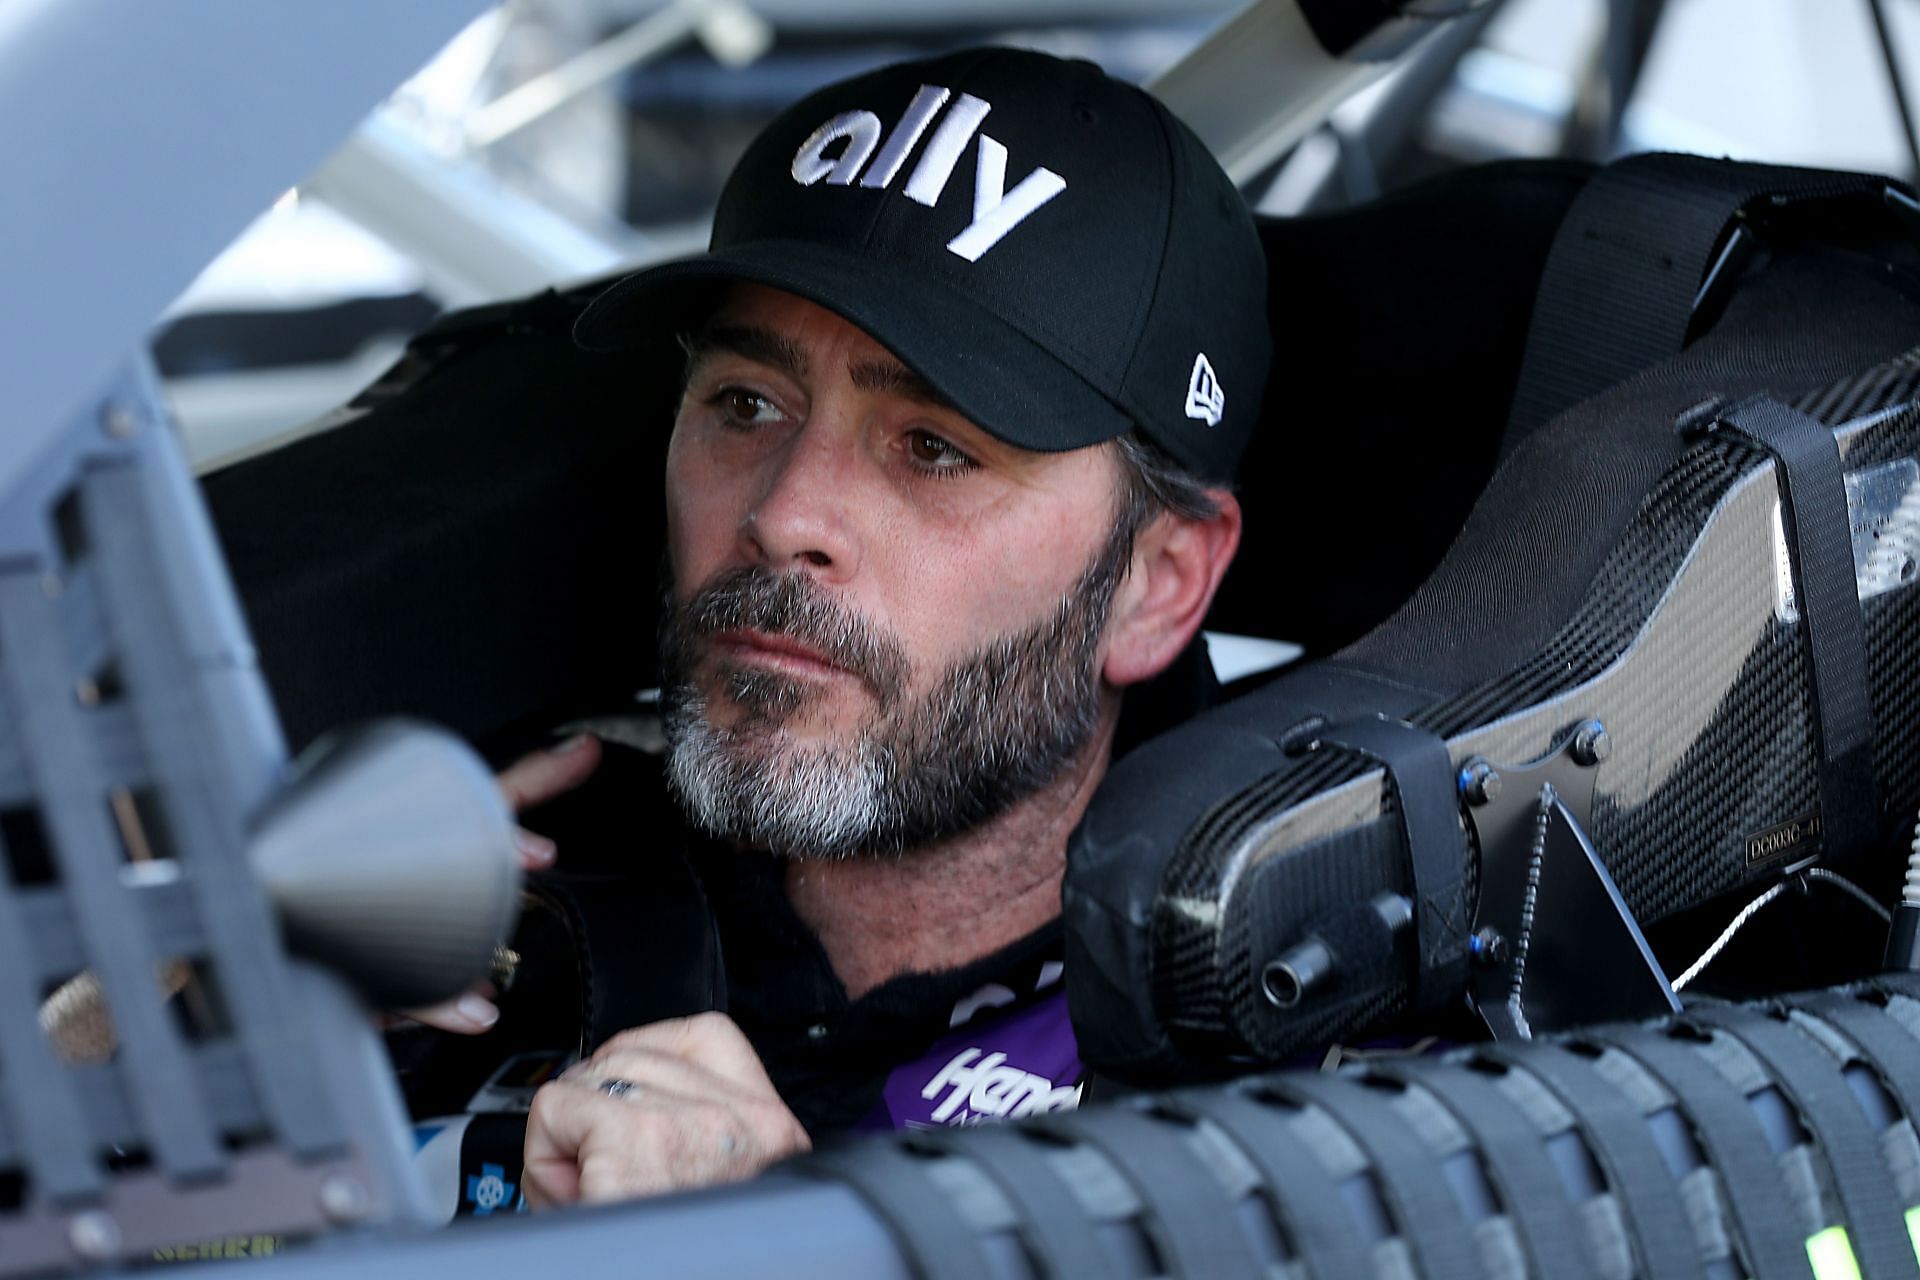 Former NASCAR driver Jimmie Johnson during his final season in 2020